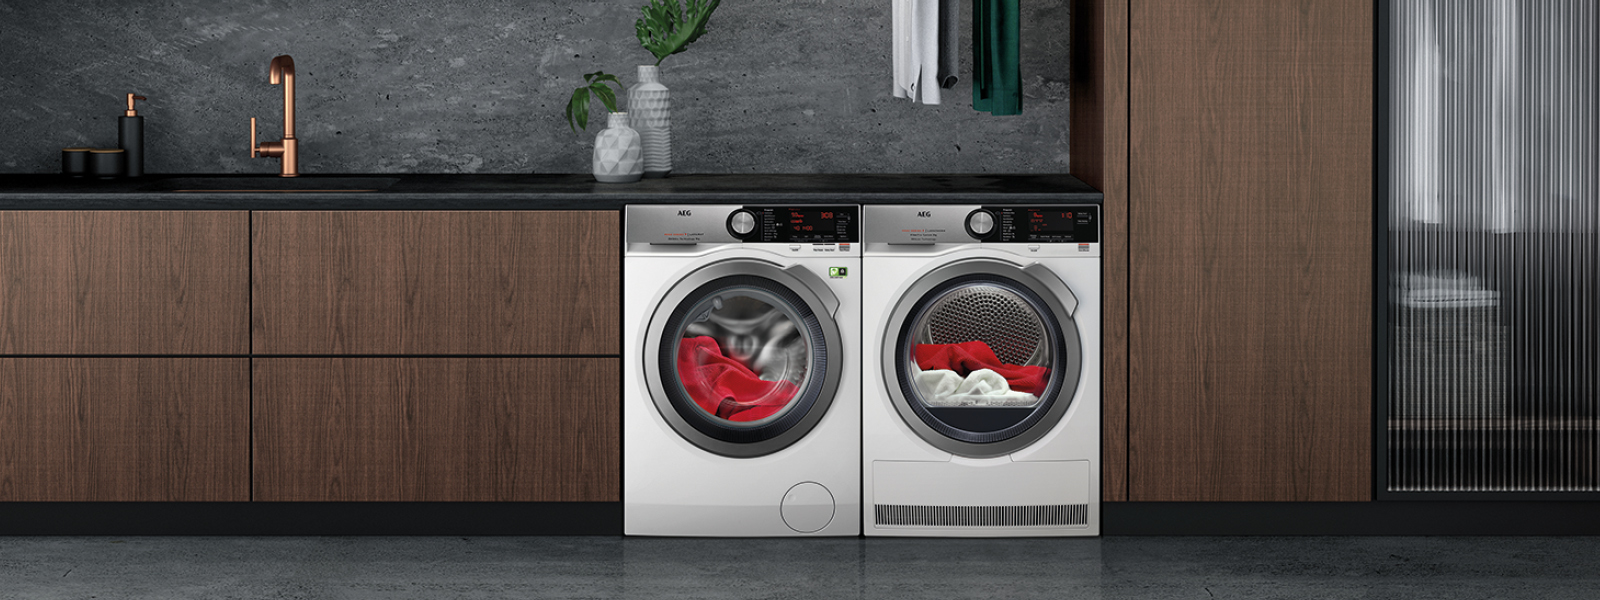 Save 10%* When You Purchase An Eligible AEG Washer & Dryer In One Transaction at Hart & Co